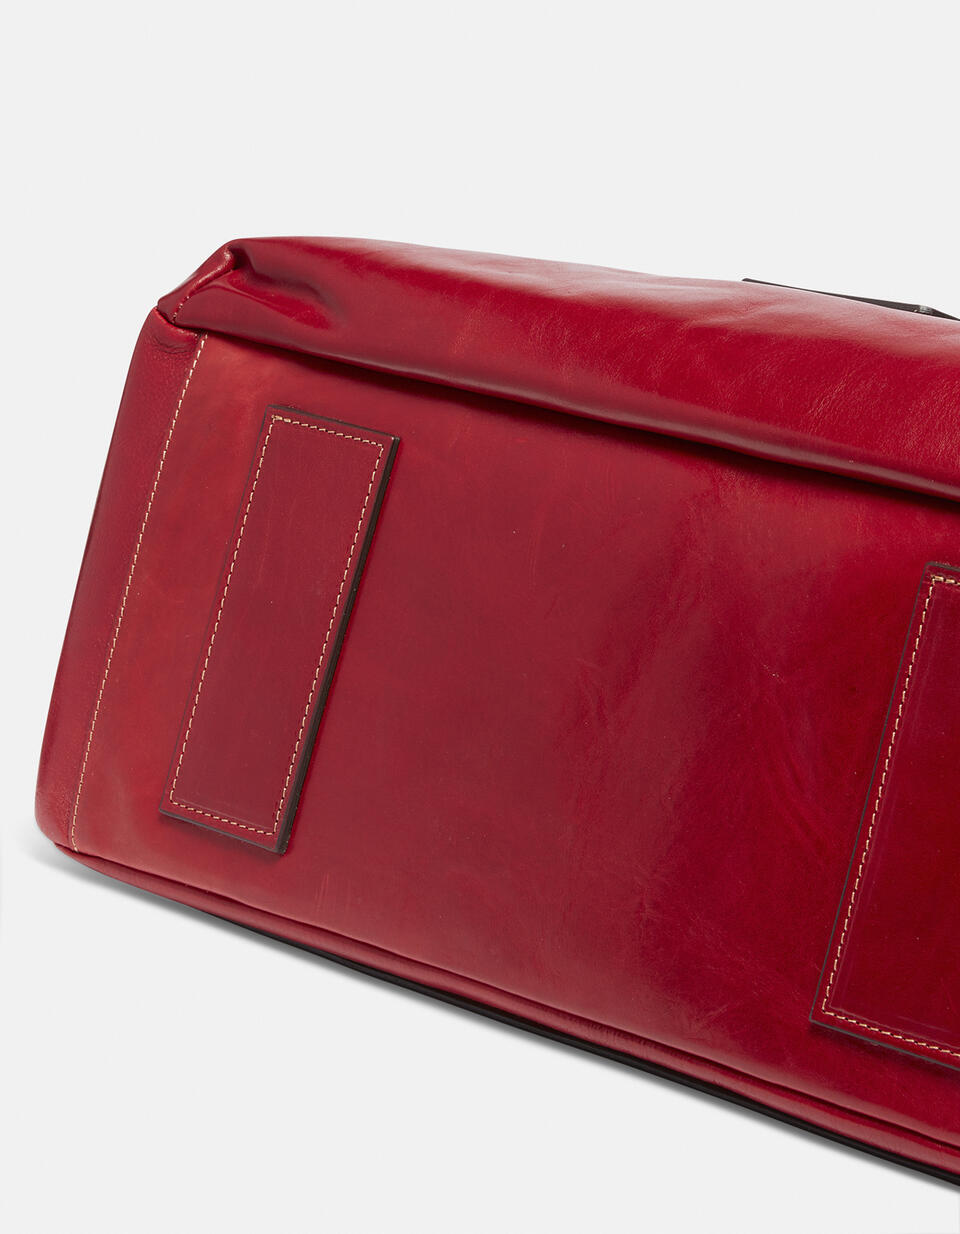 Tokyo small weekender bag - Luggage | TRAVEL BAGS ROSSO - Luggage | TRAVEL BAGSCuoieria Fiorentina